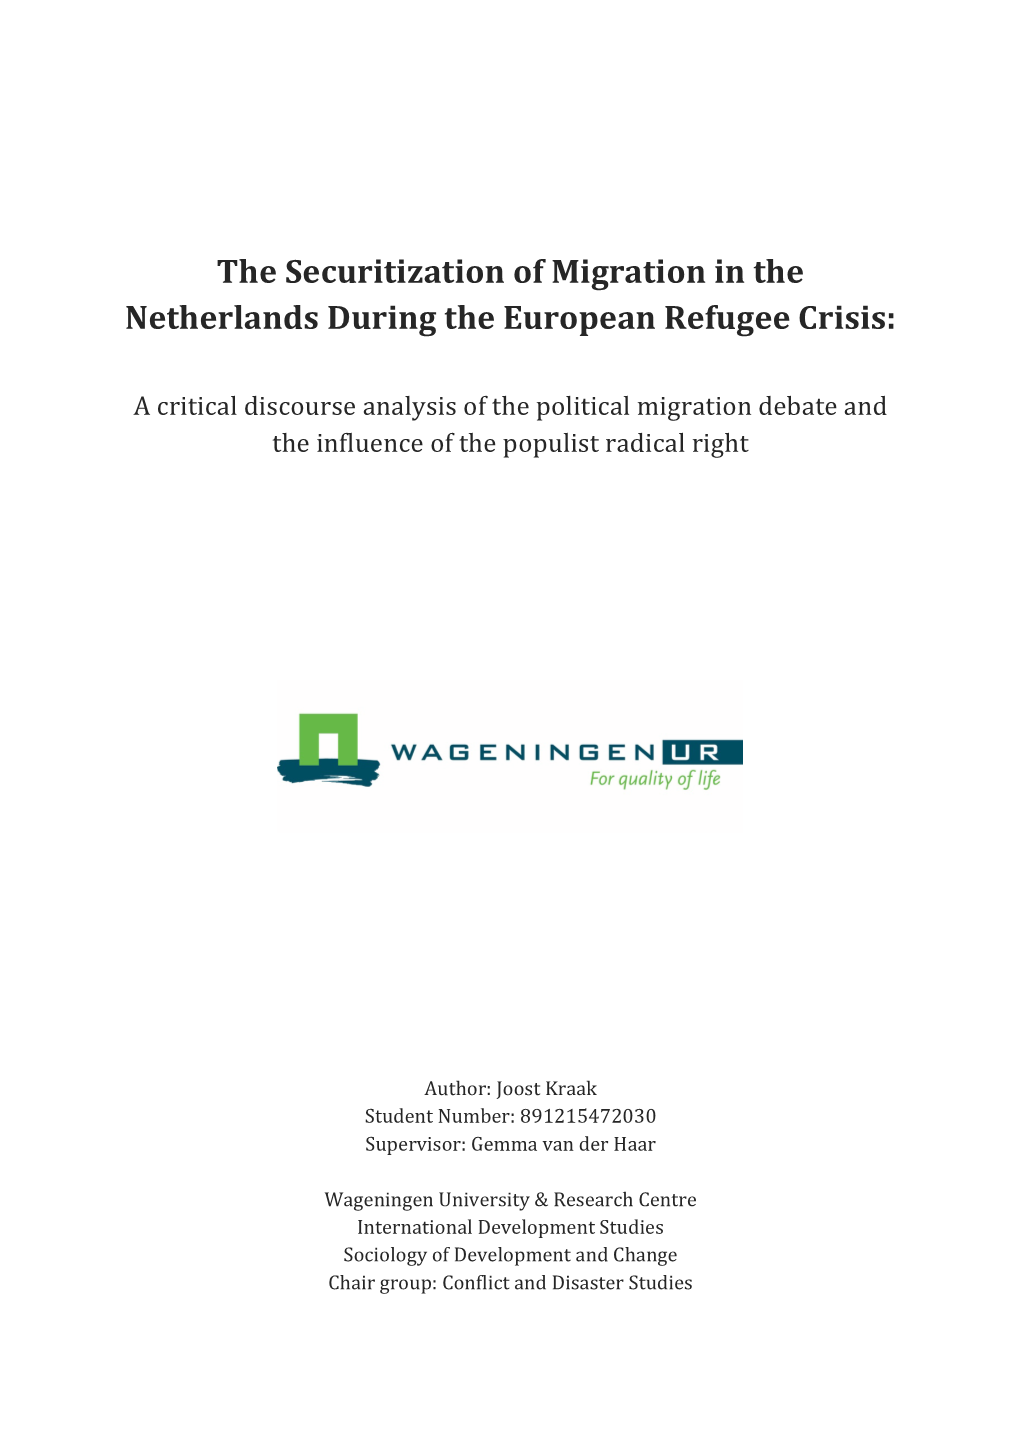 The Securitization of Migration in the Netherlands During the European Refugee Crisis